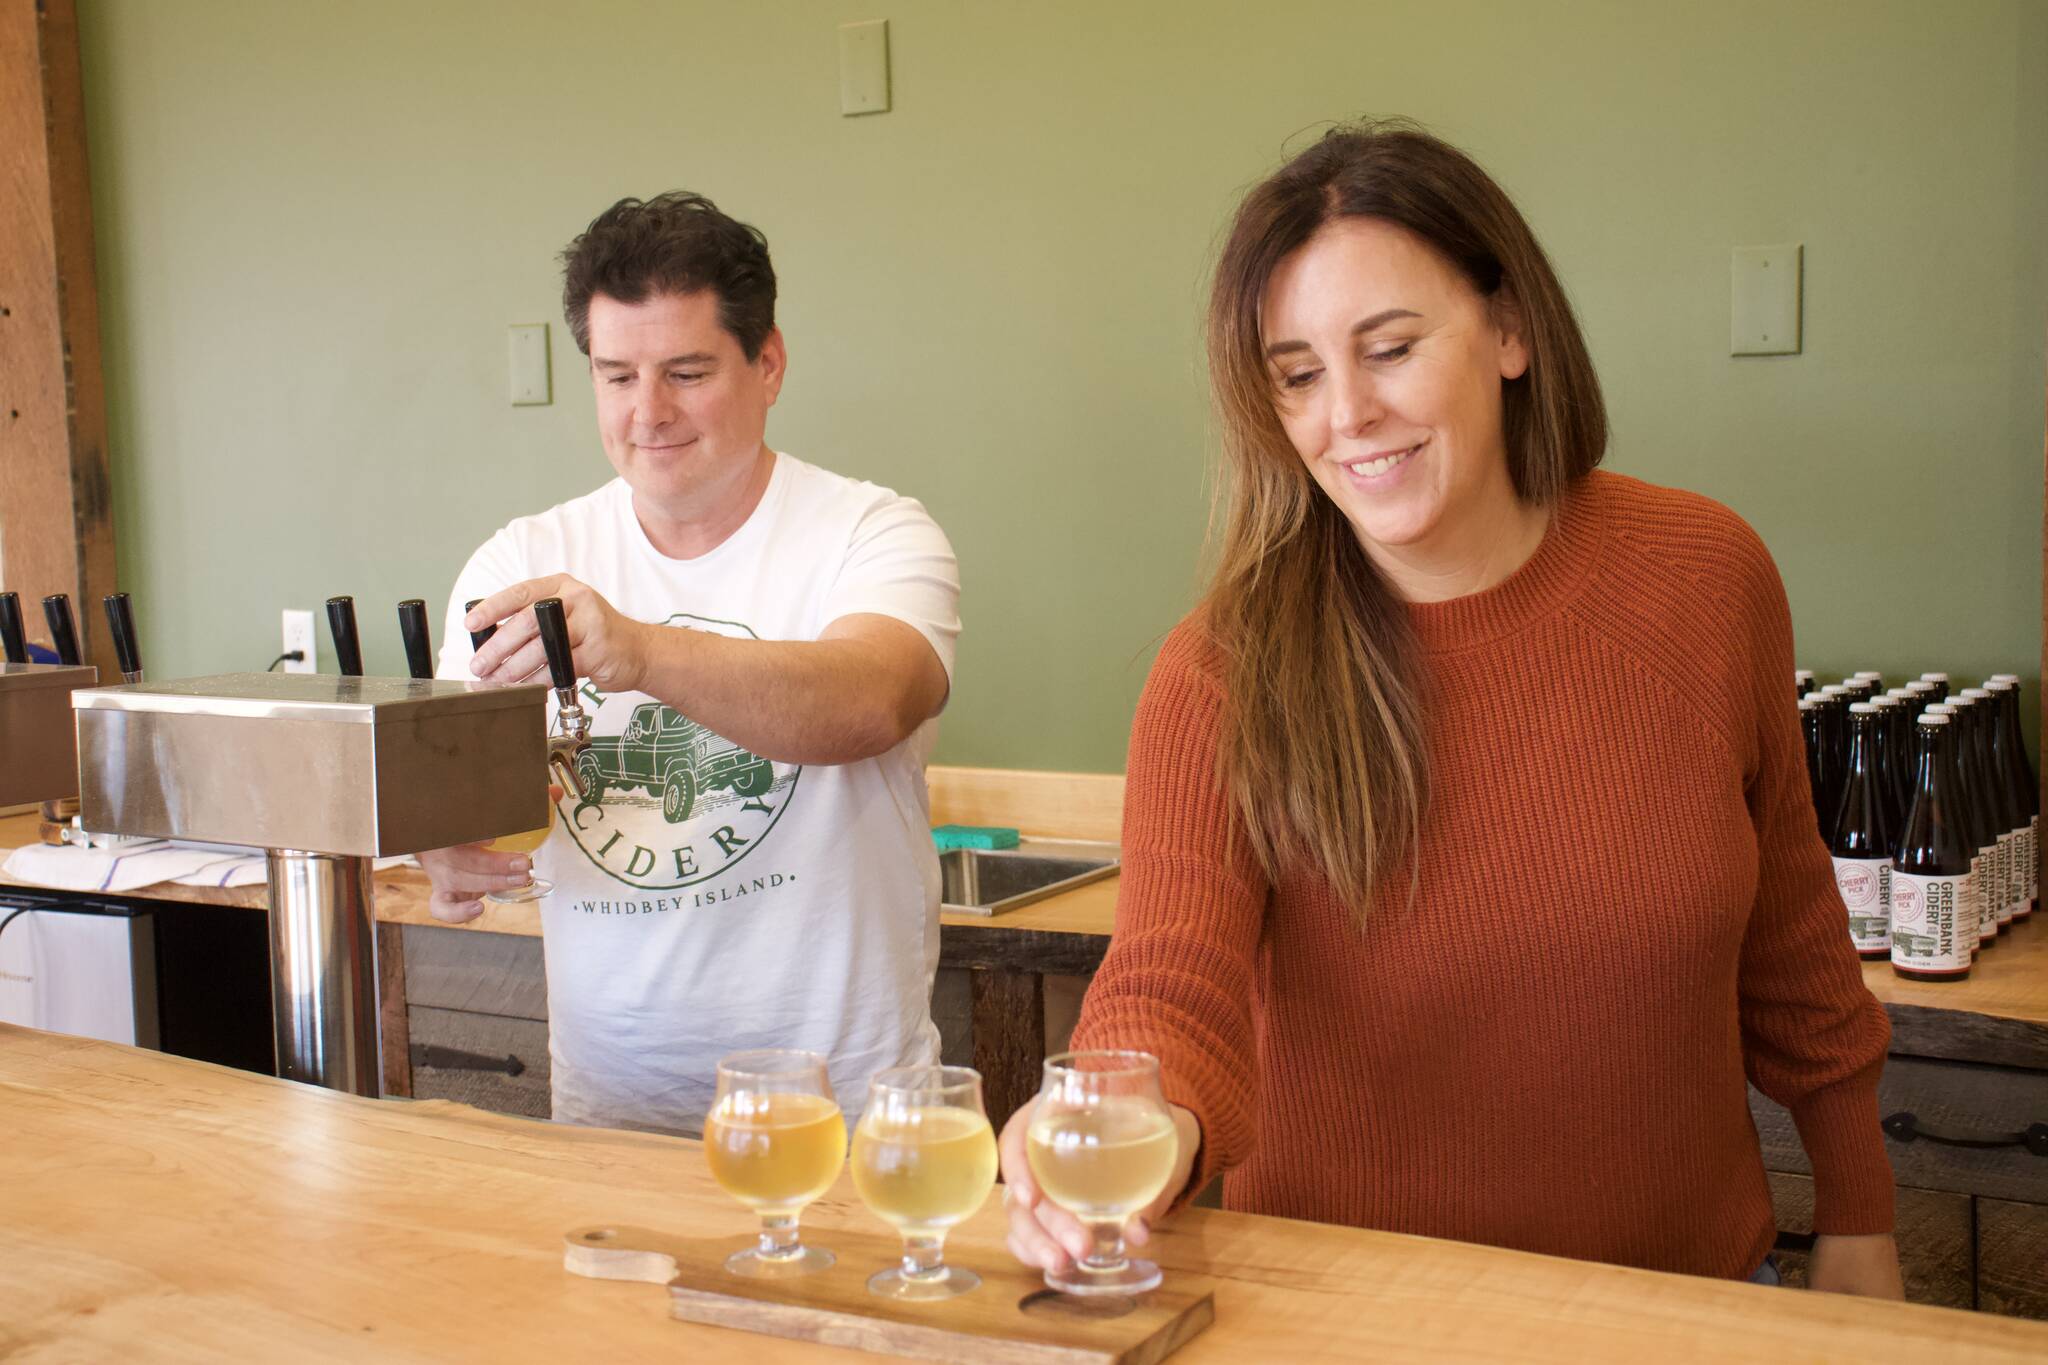 Photo by Rachel Rosen/Whidbey News-Times
Jeff Stoner and Kim Taylor co-own Greenbank Cidery which recently opened a tasting a room in Coupeville.